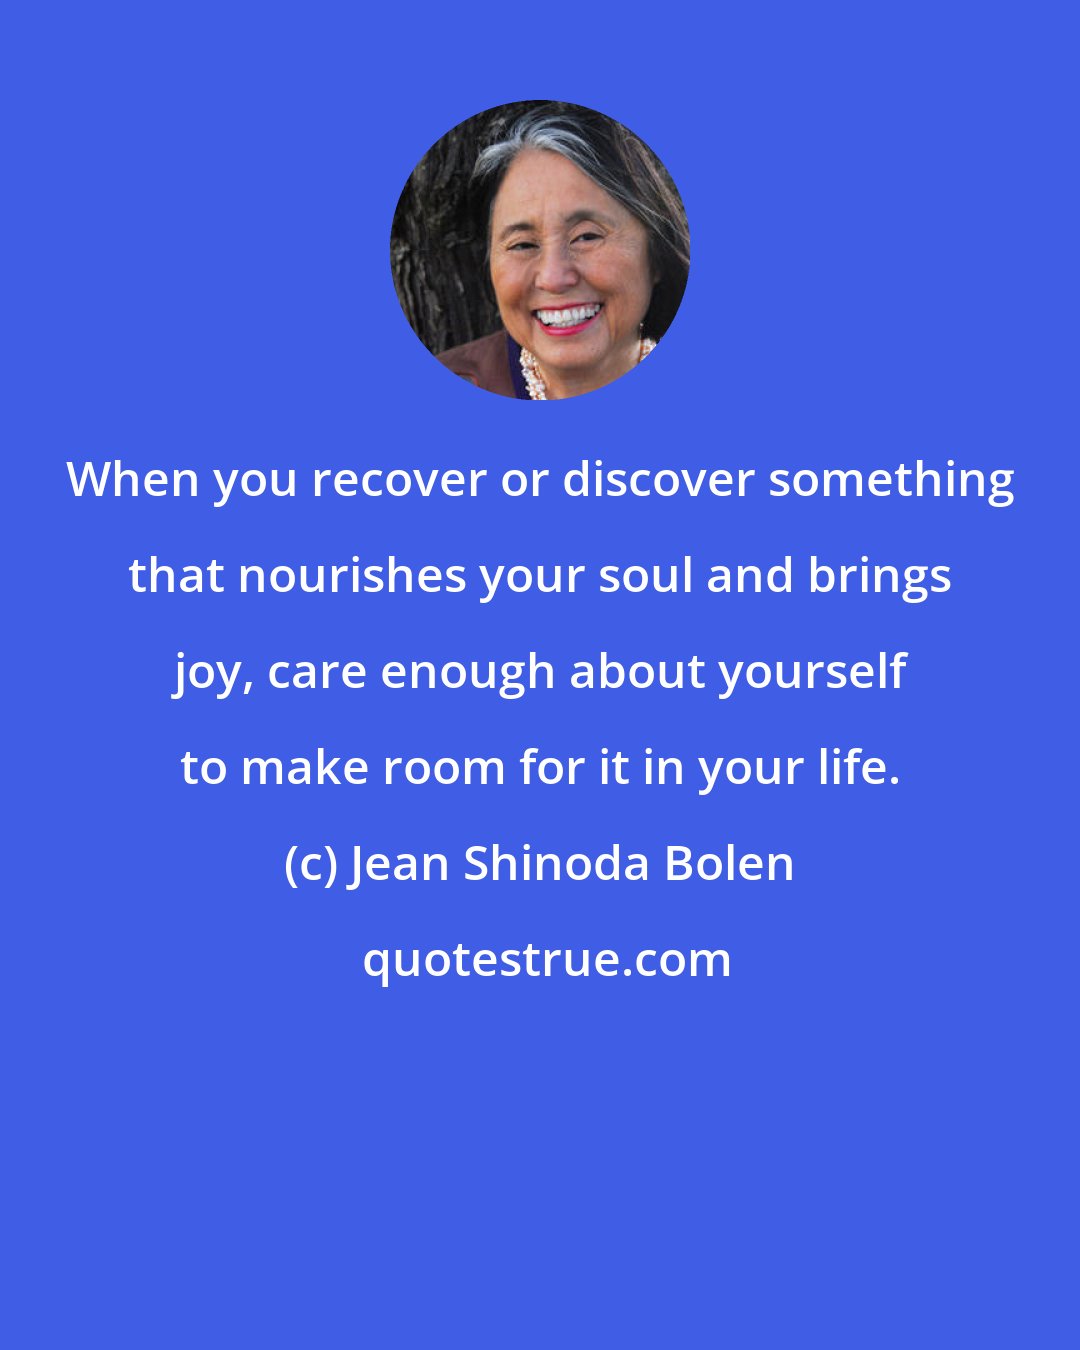 Jean Shinoda Bolen: When you recover or discover something that nourishes your soul and brings joy, care enough about yourself to make room for it in your life.